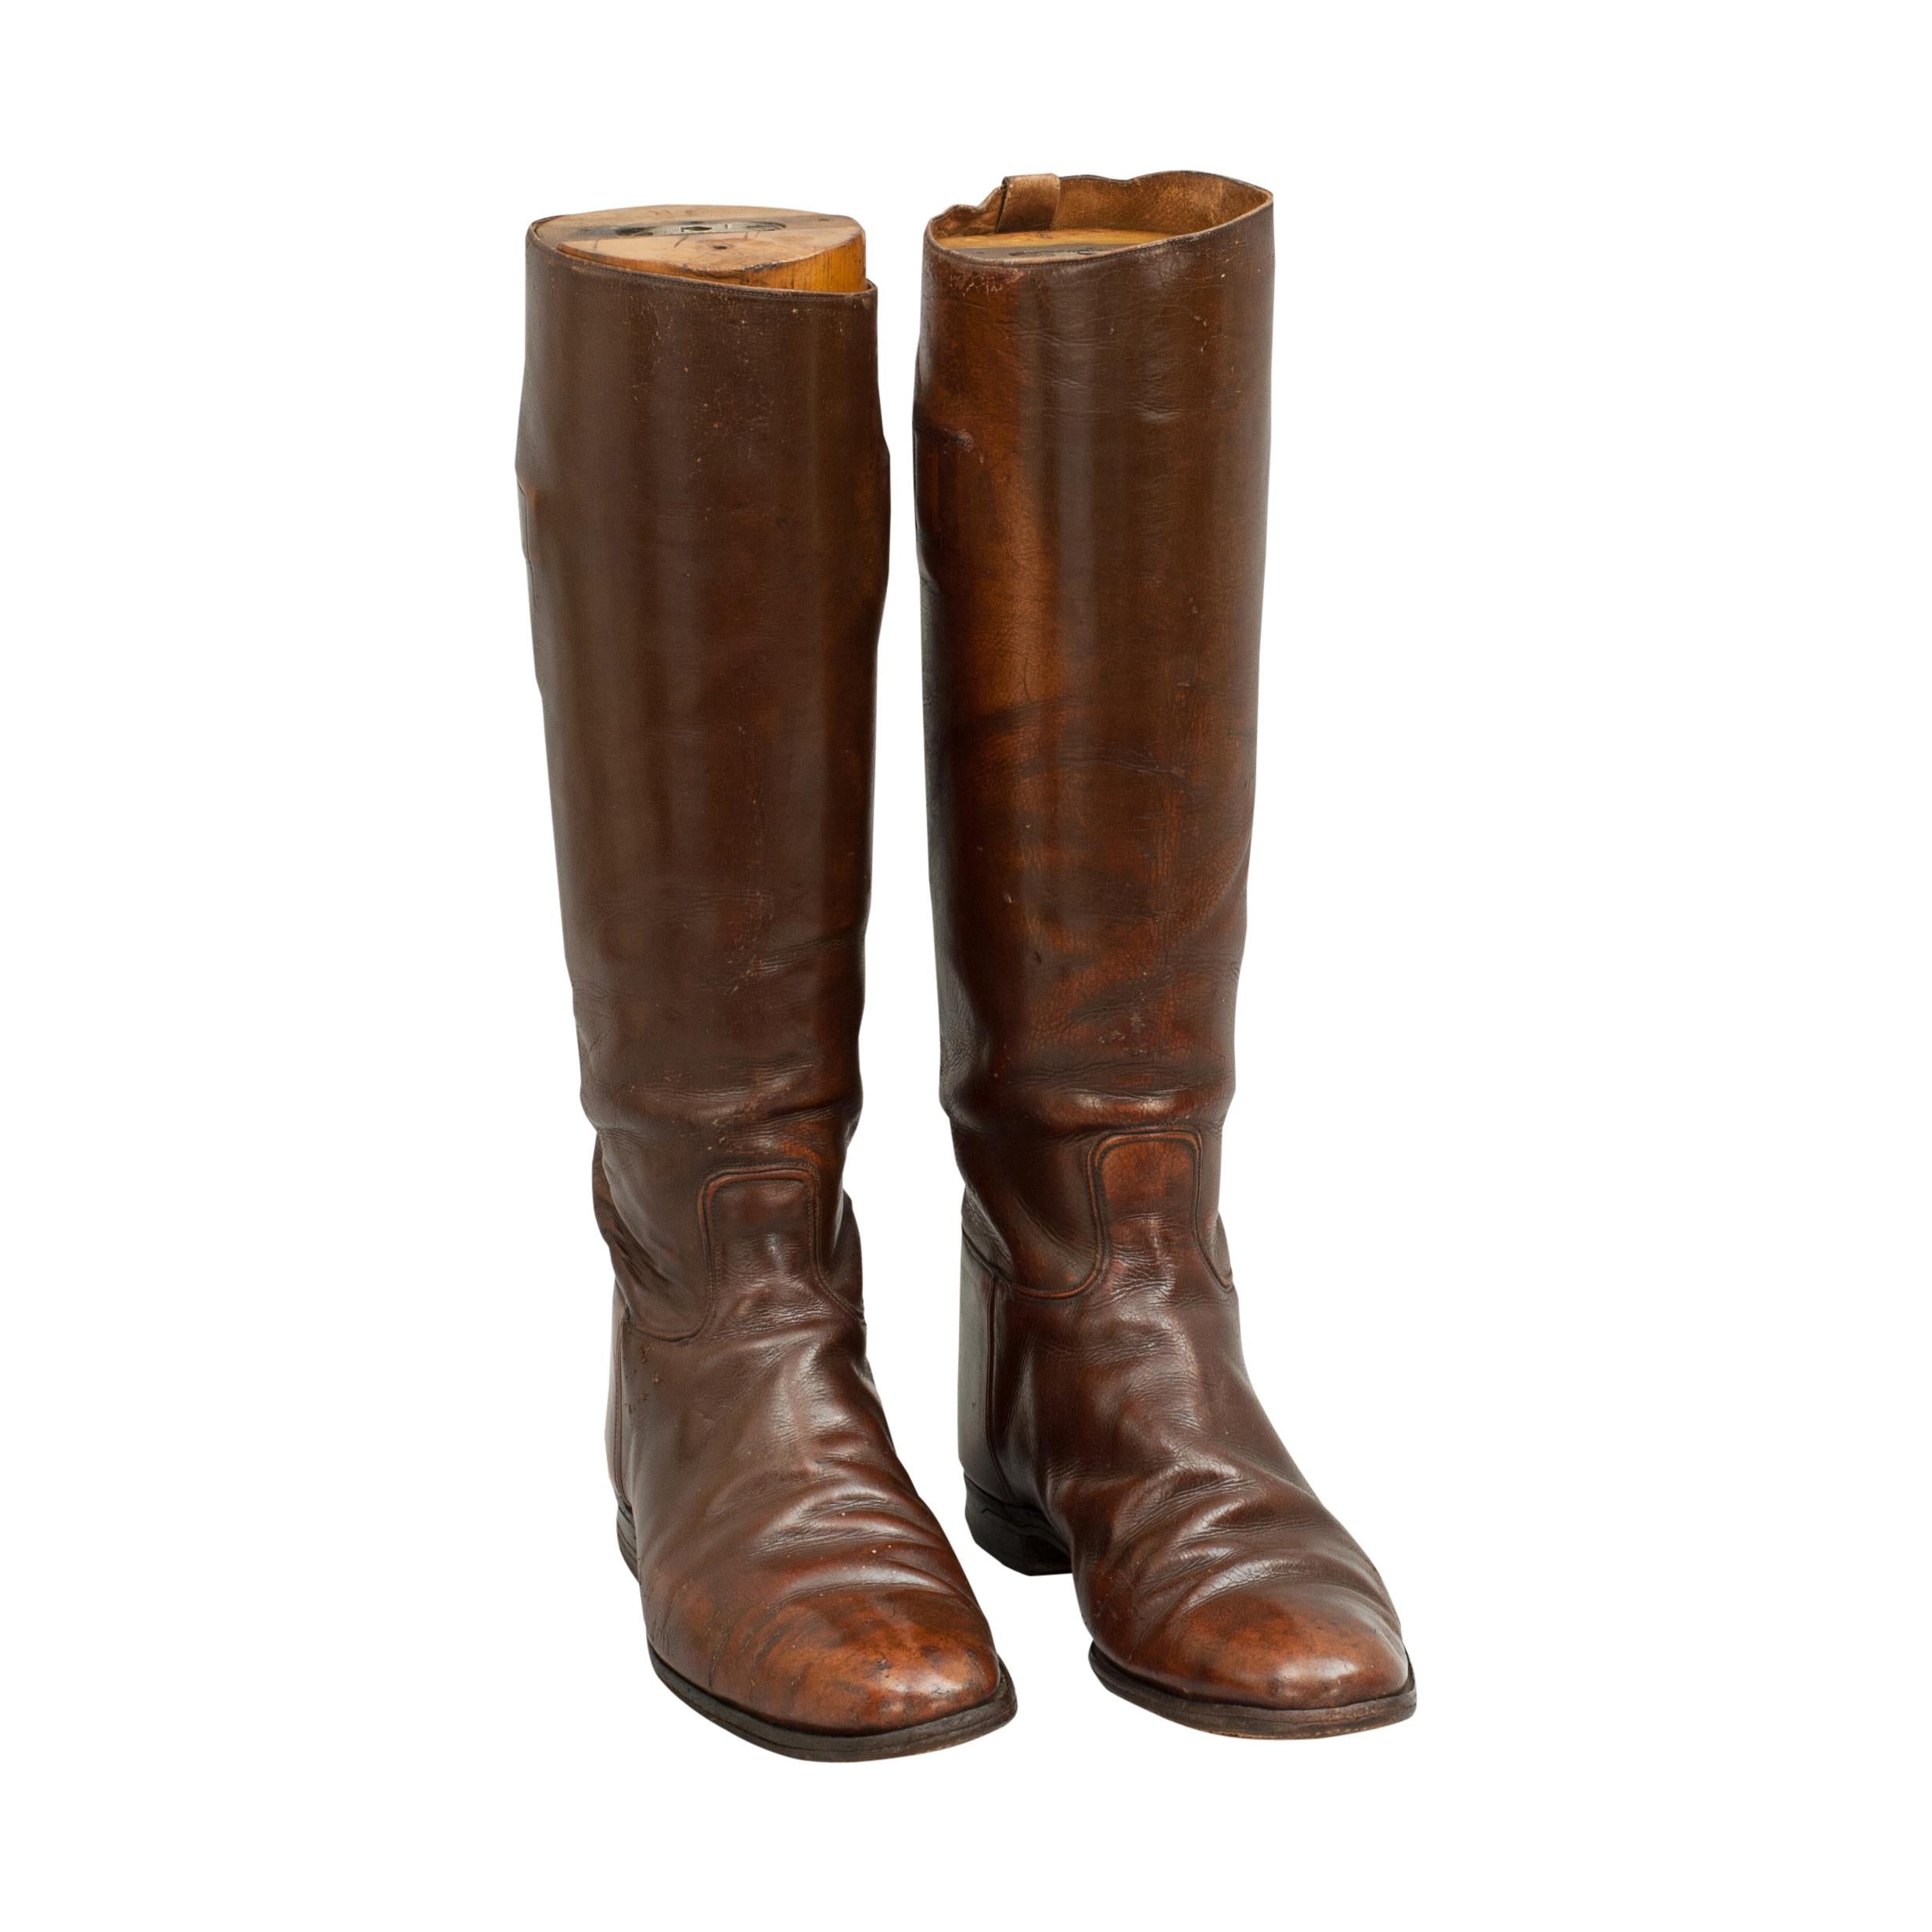 Vintage Brown Leather Riding Boots